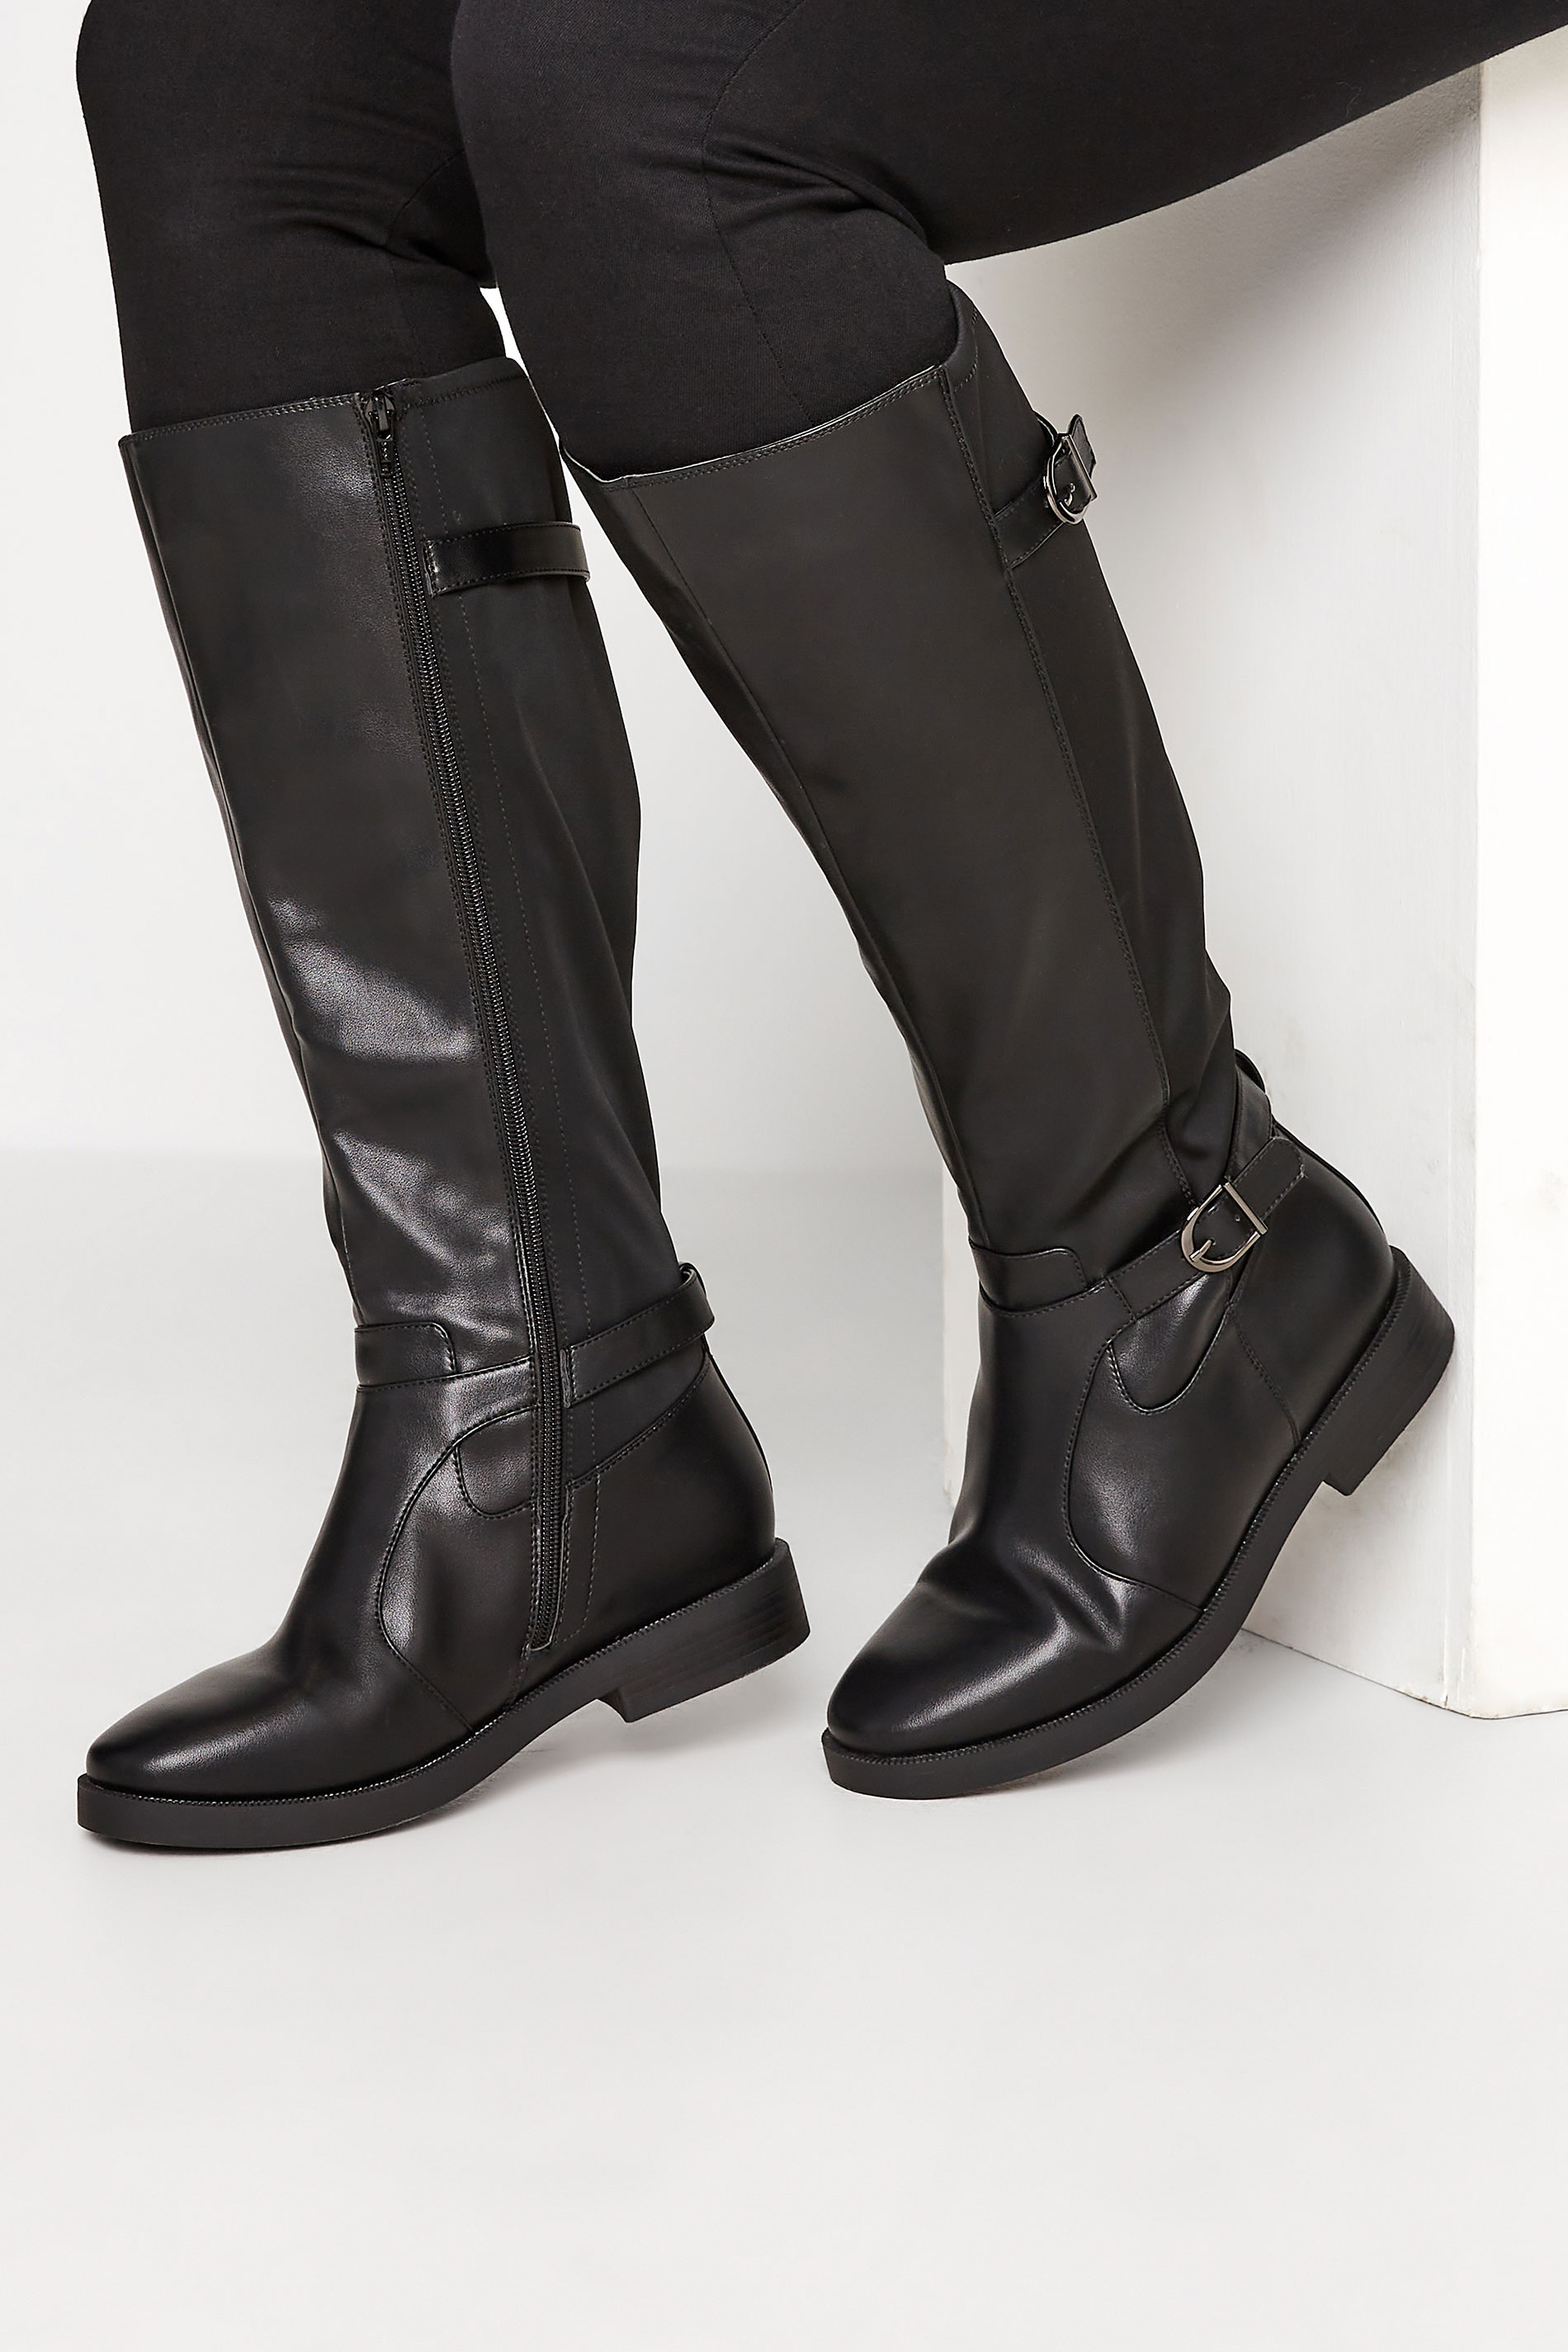 Black Double Strap Knee High Boots In Extra Wide EEE Fit 1